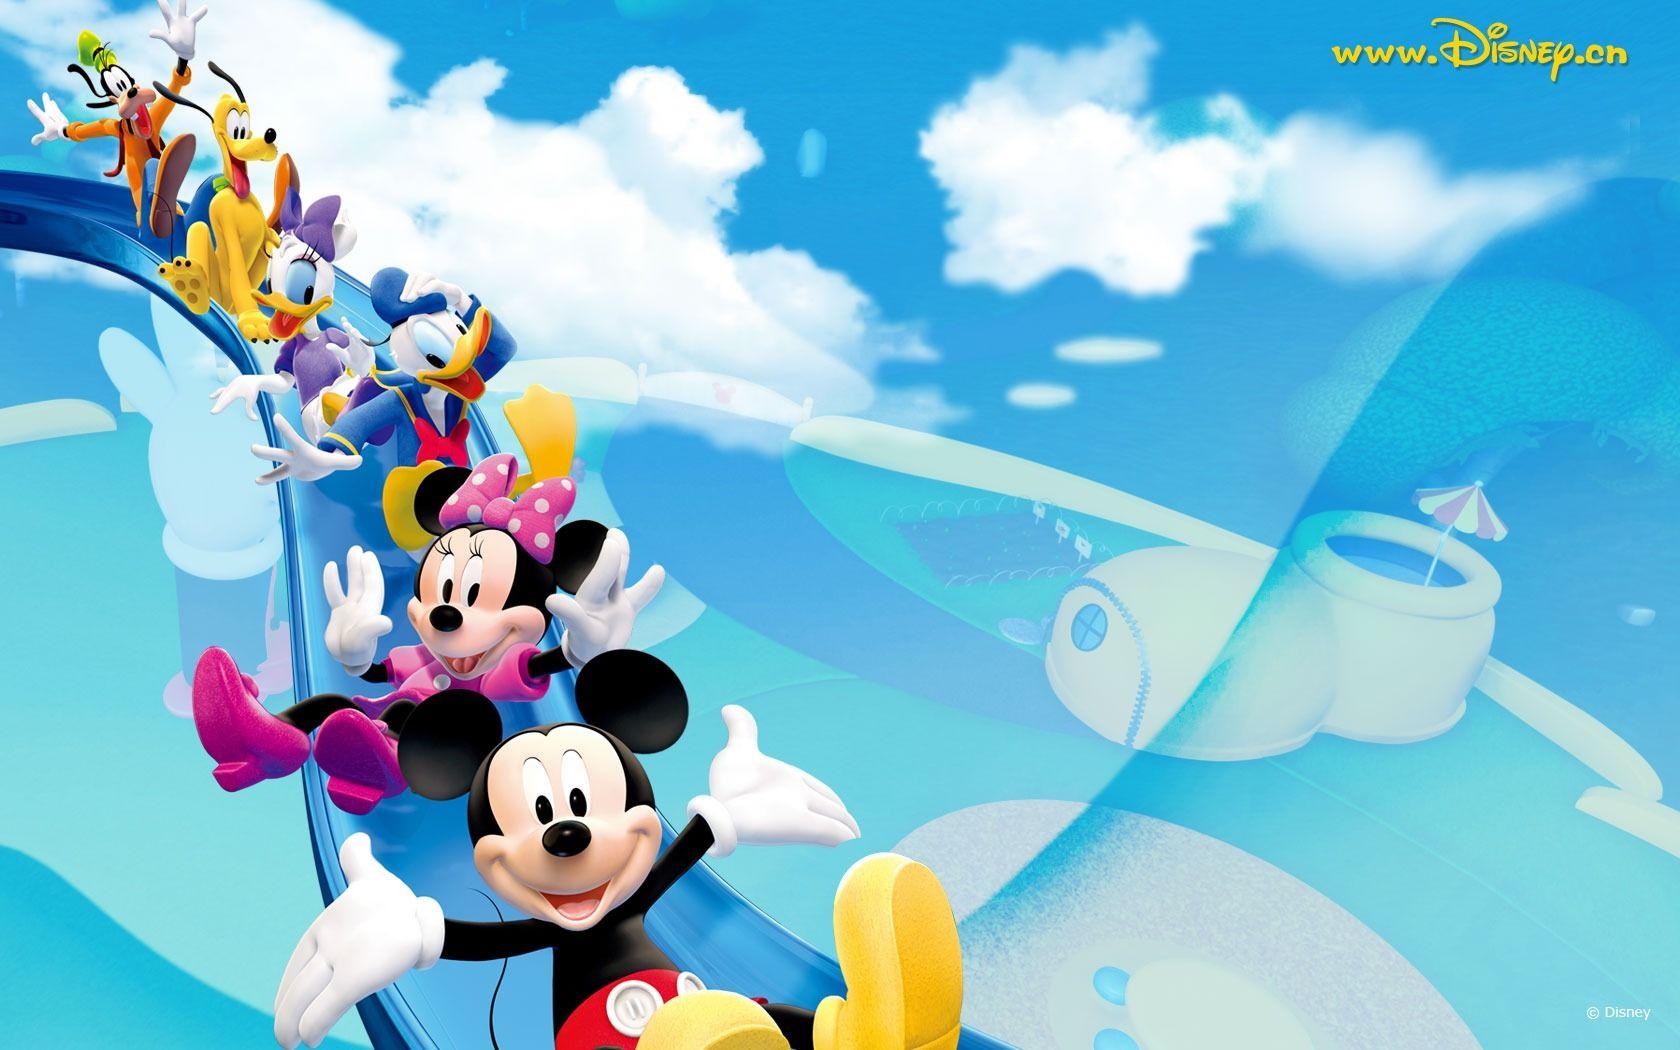 100+] Mickey Mouse Clubhouse Wallpapers